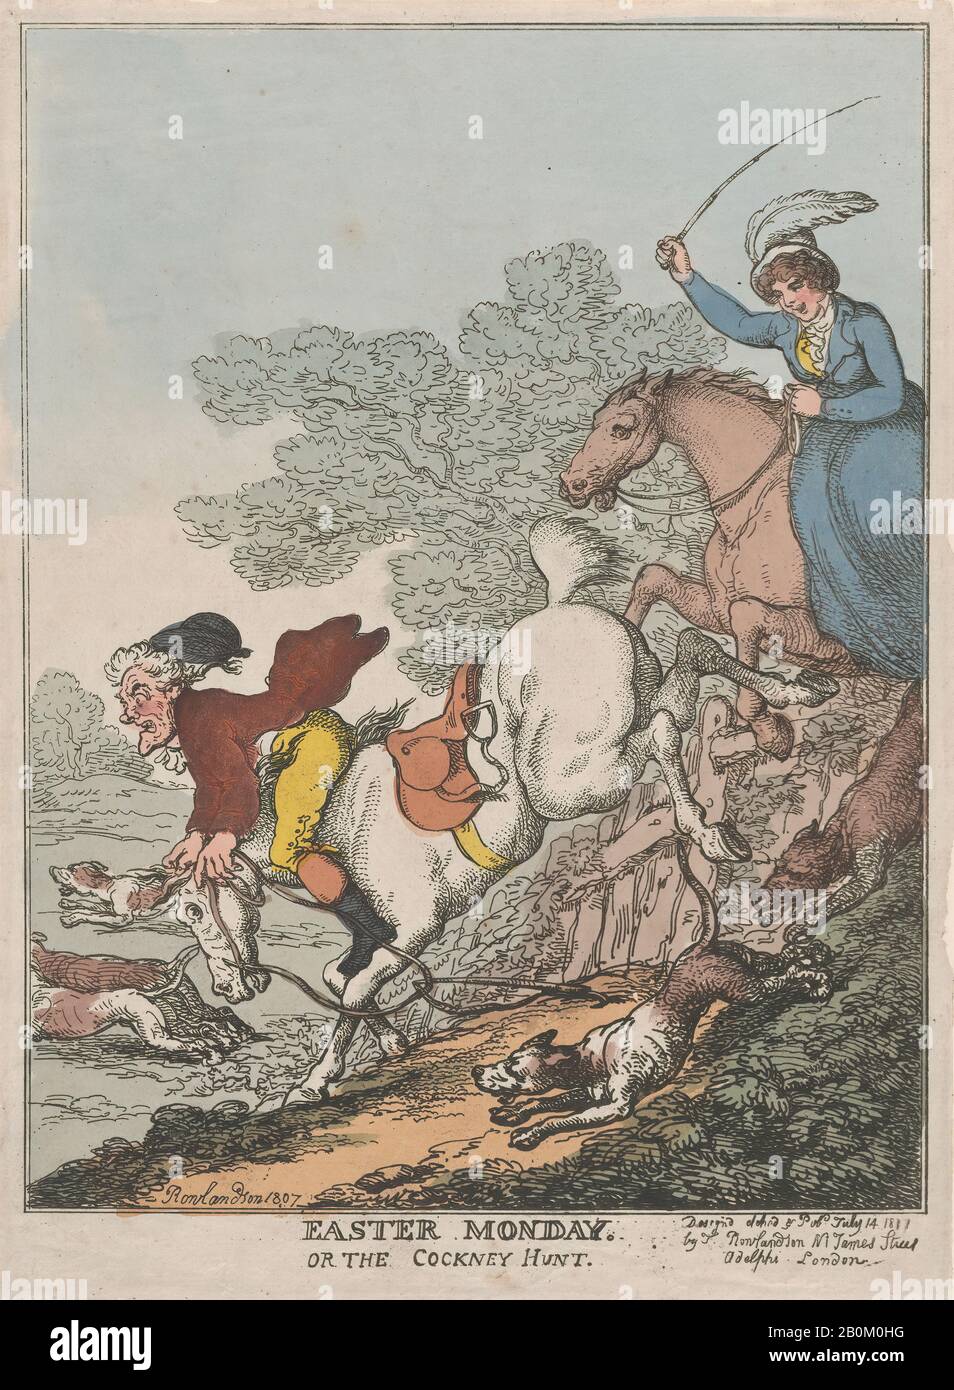 Thomas Rowlandson, Easter Monday, or The Cockney Hunt, July 14, 1807, Hand-colored etching, Sheet: 13 5/16 × 9 3/4 in. (33.8 × 24.7 cm), Prints Stock Photo